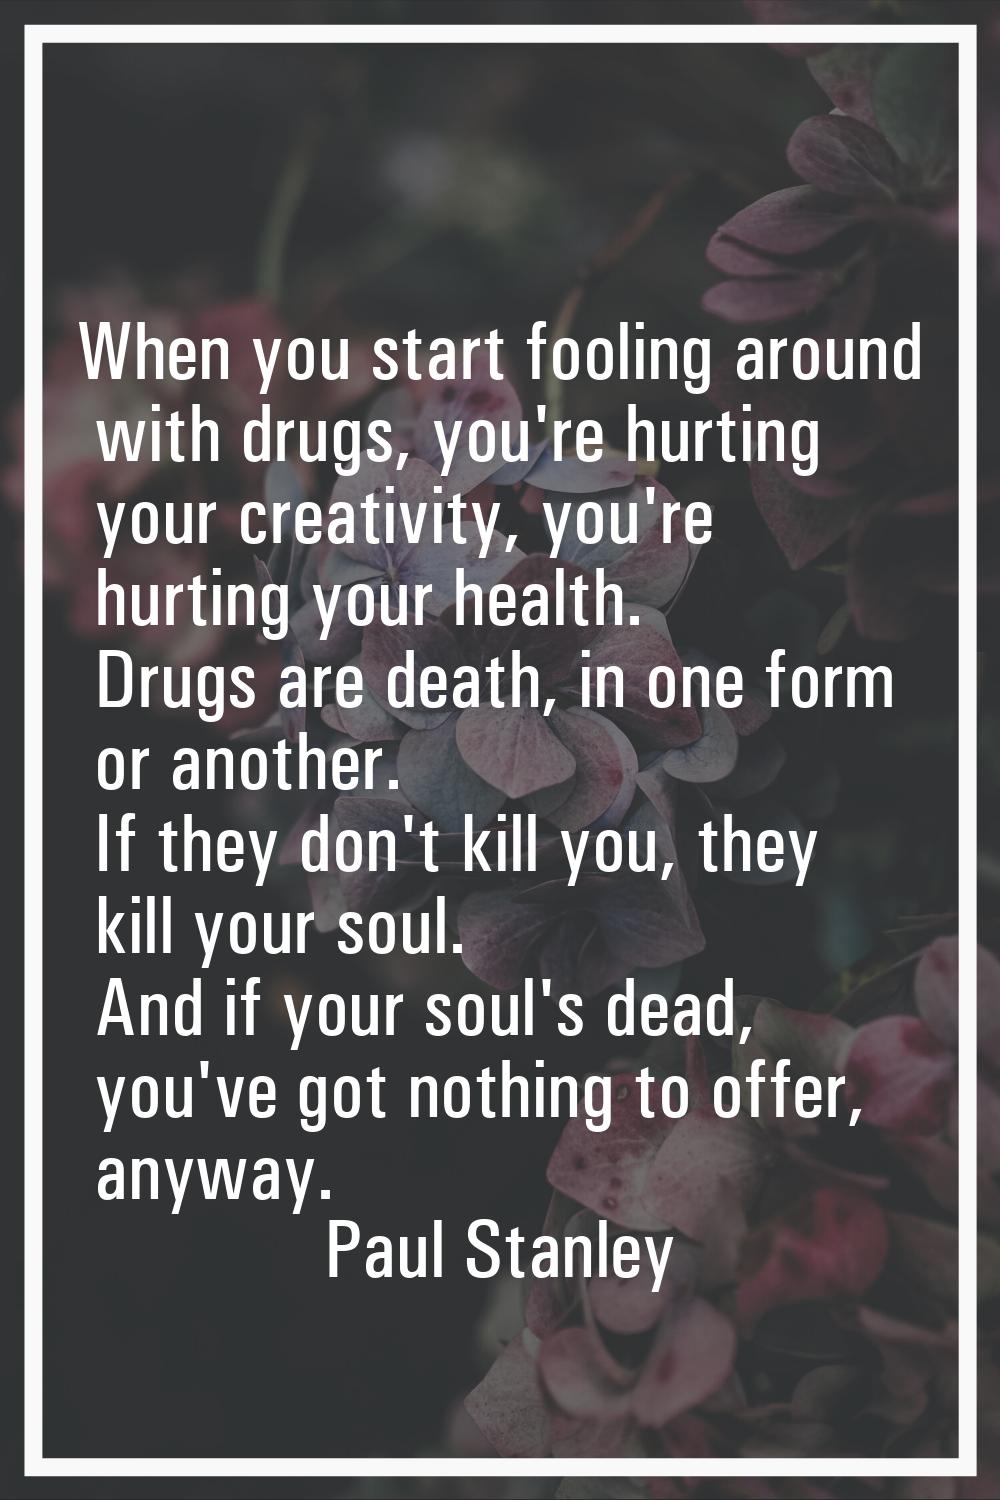 When you start fooling around with drugs, you're hurting your creativity, you're hurting your healt